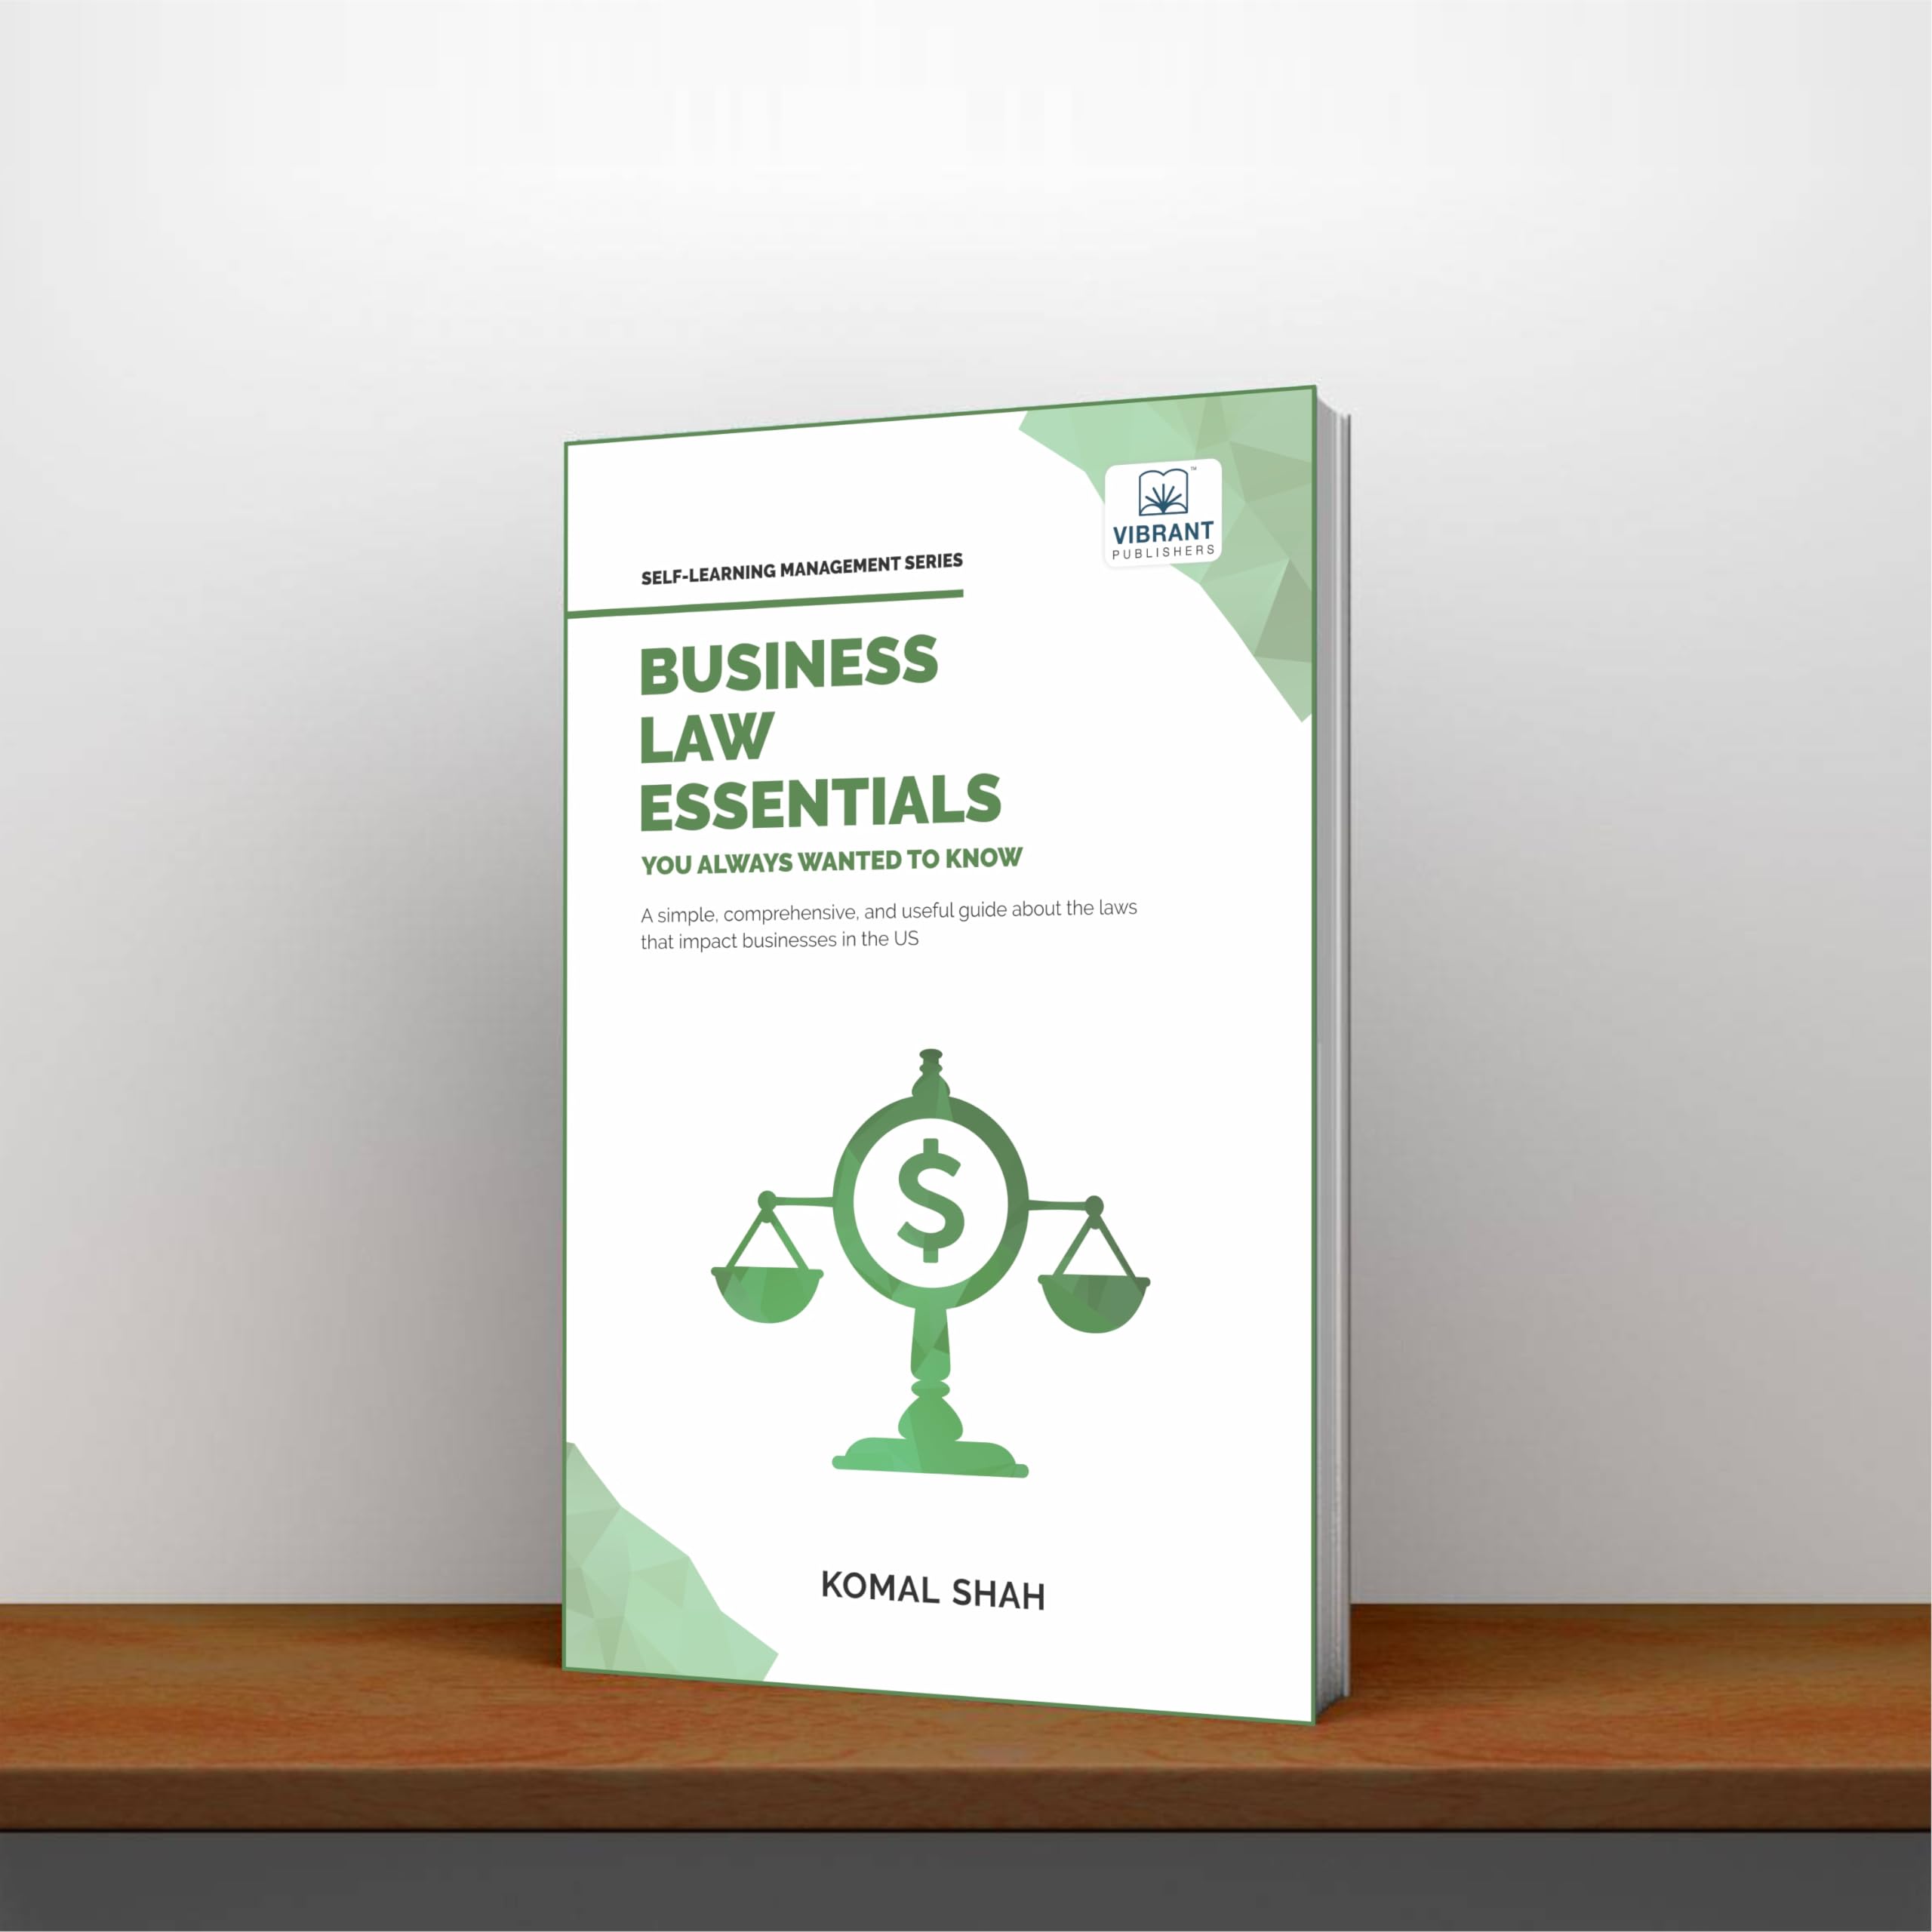 Business Law Essentials You Always Wanted To Know (Self-Learning Management Series)